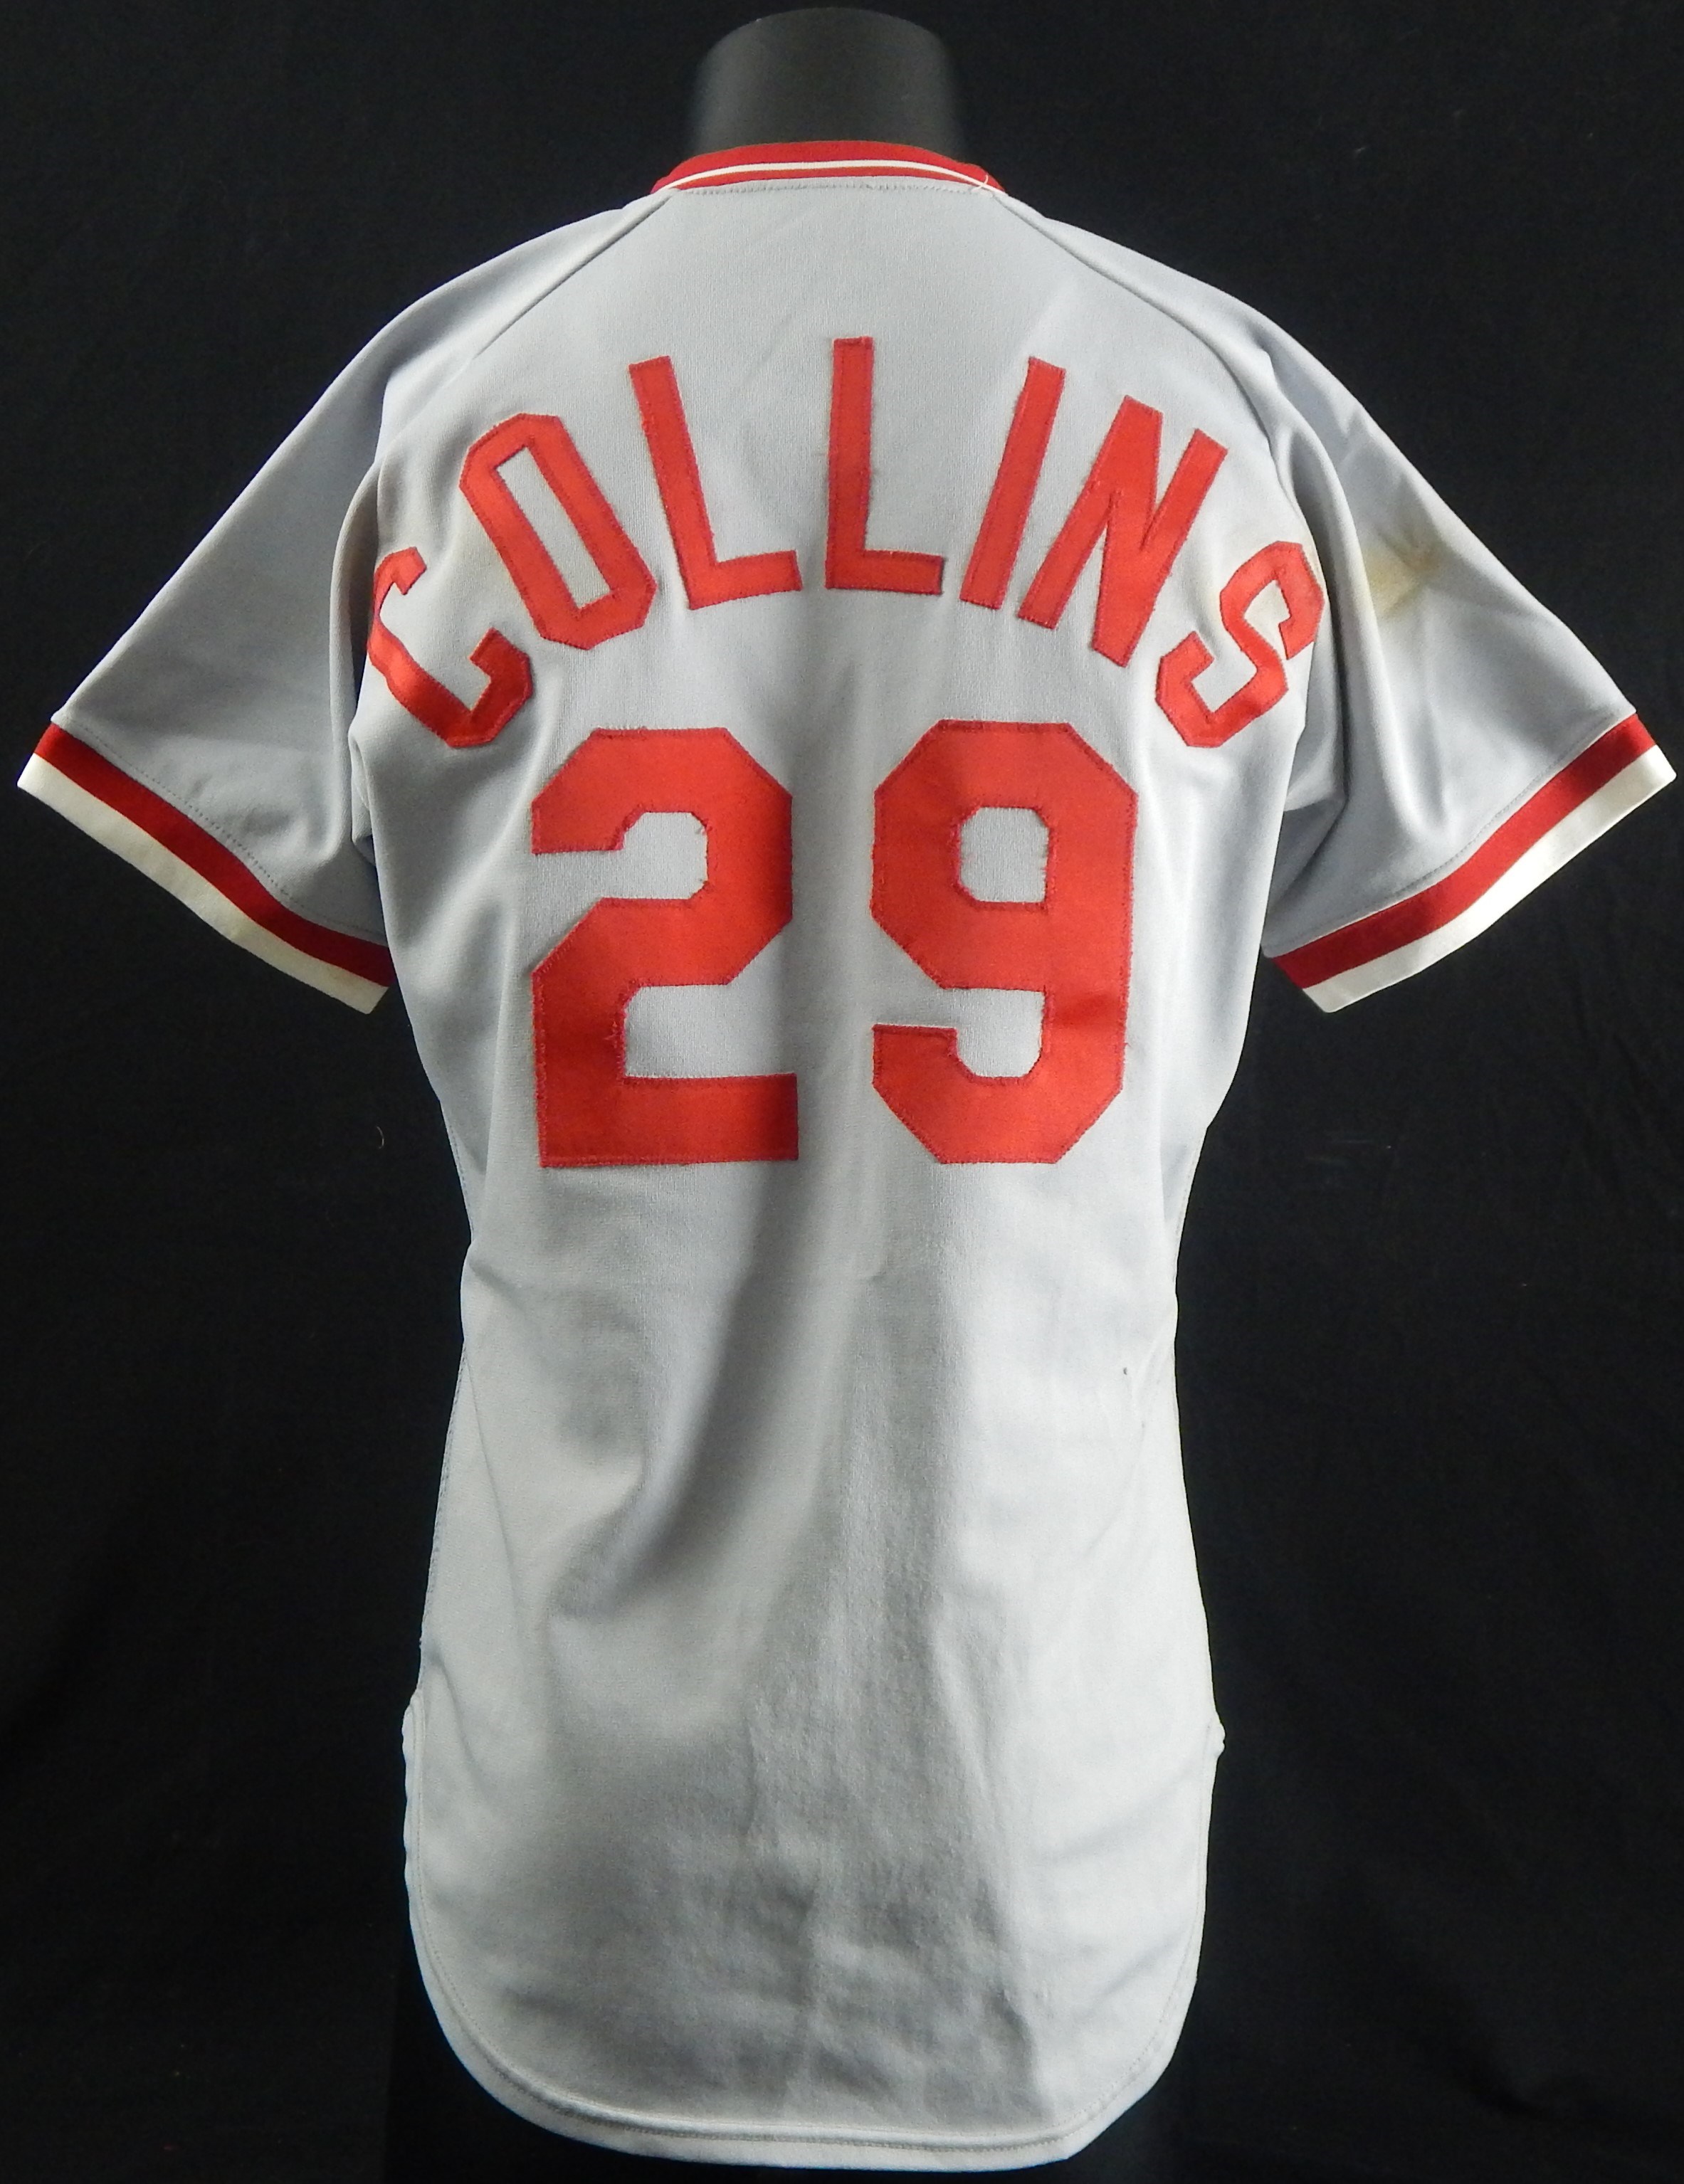 - 1980 Dave Collins Reds Game Worn Jersey From the Bernie Stowe Collection